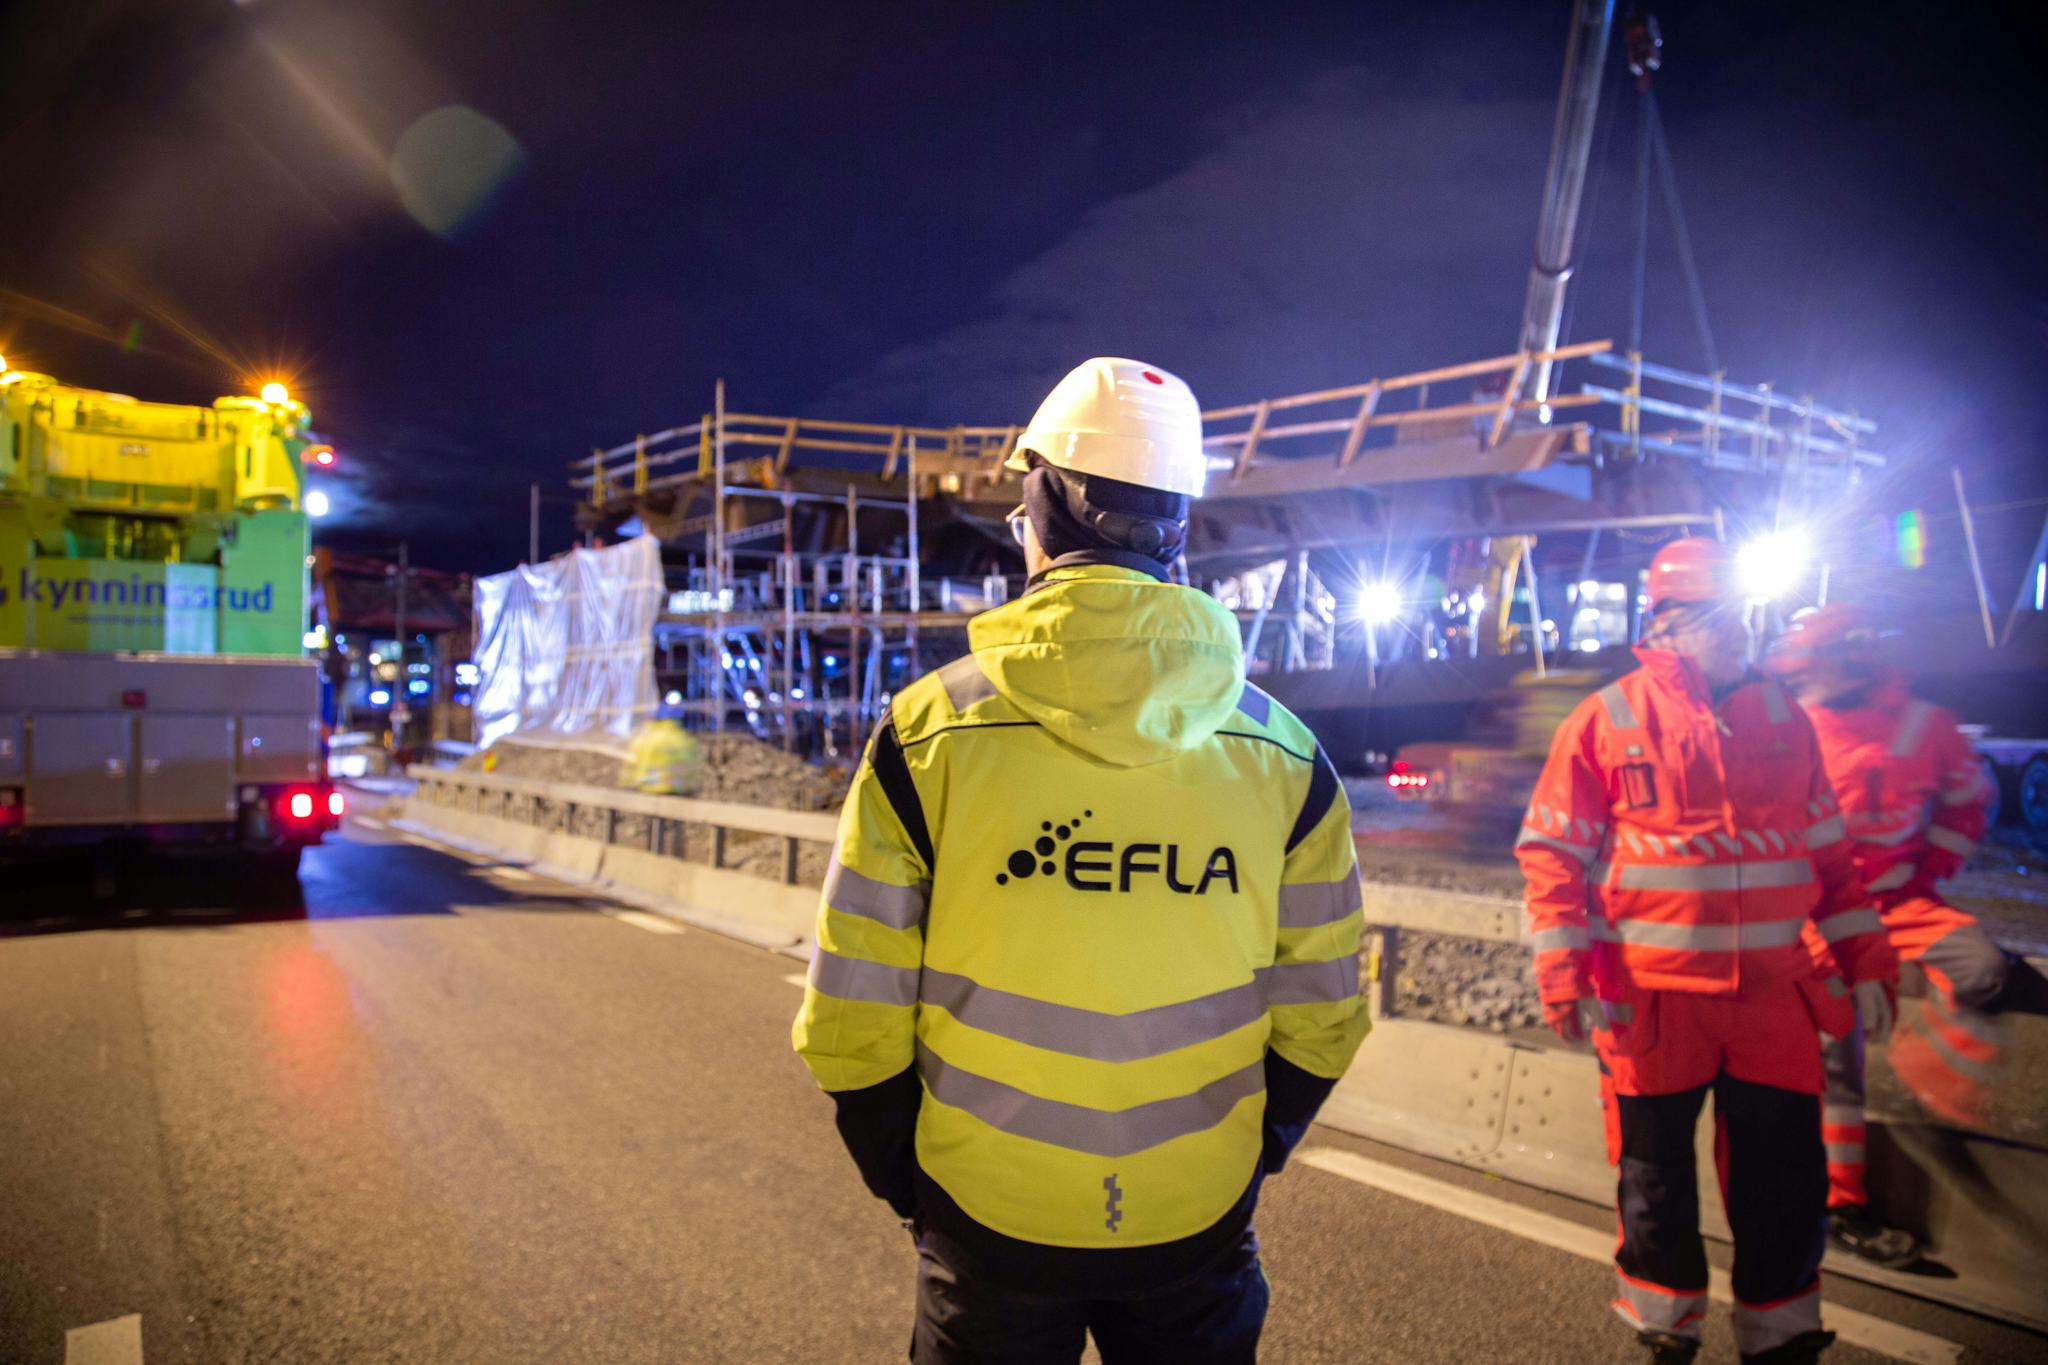 Three men wearing high visibility jacket at a brightly lit construction site at night